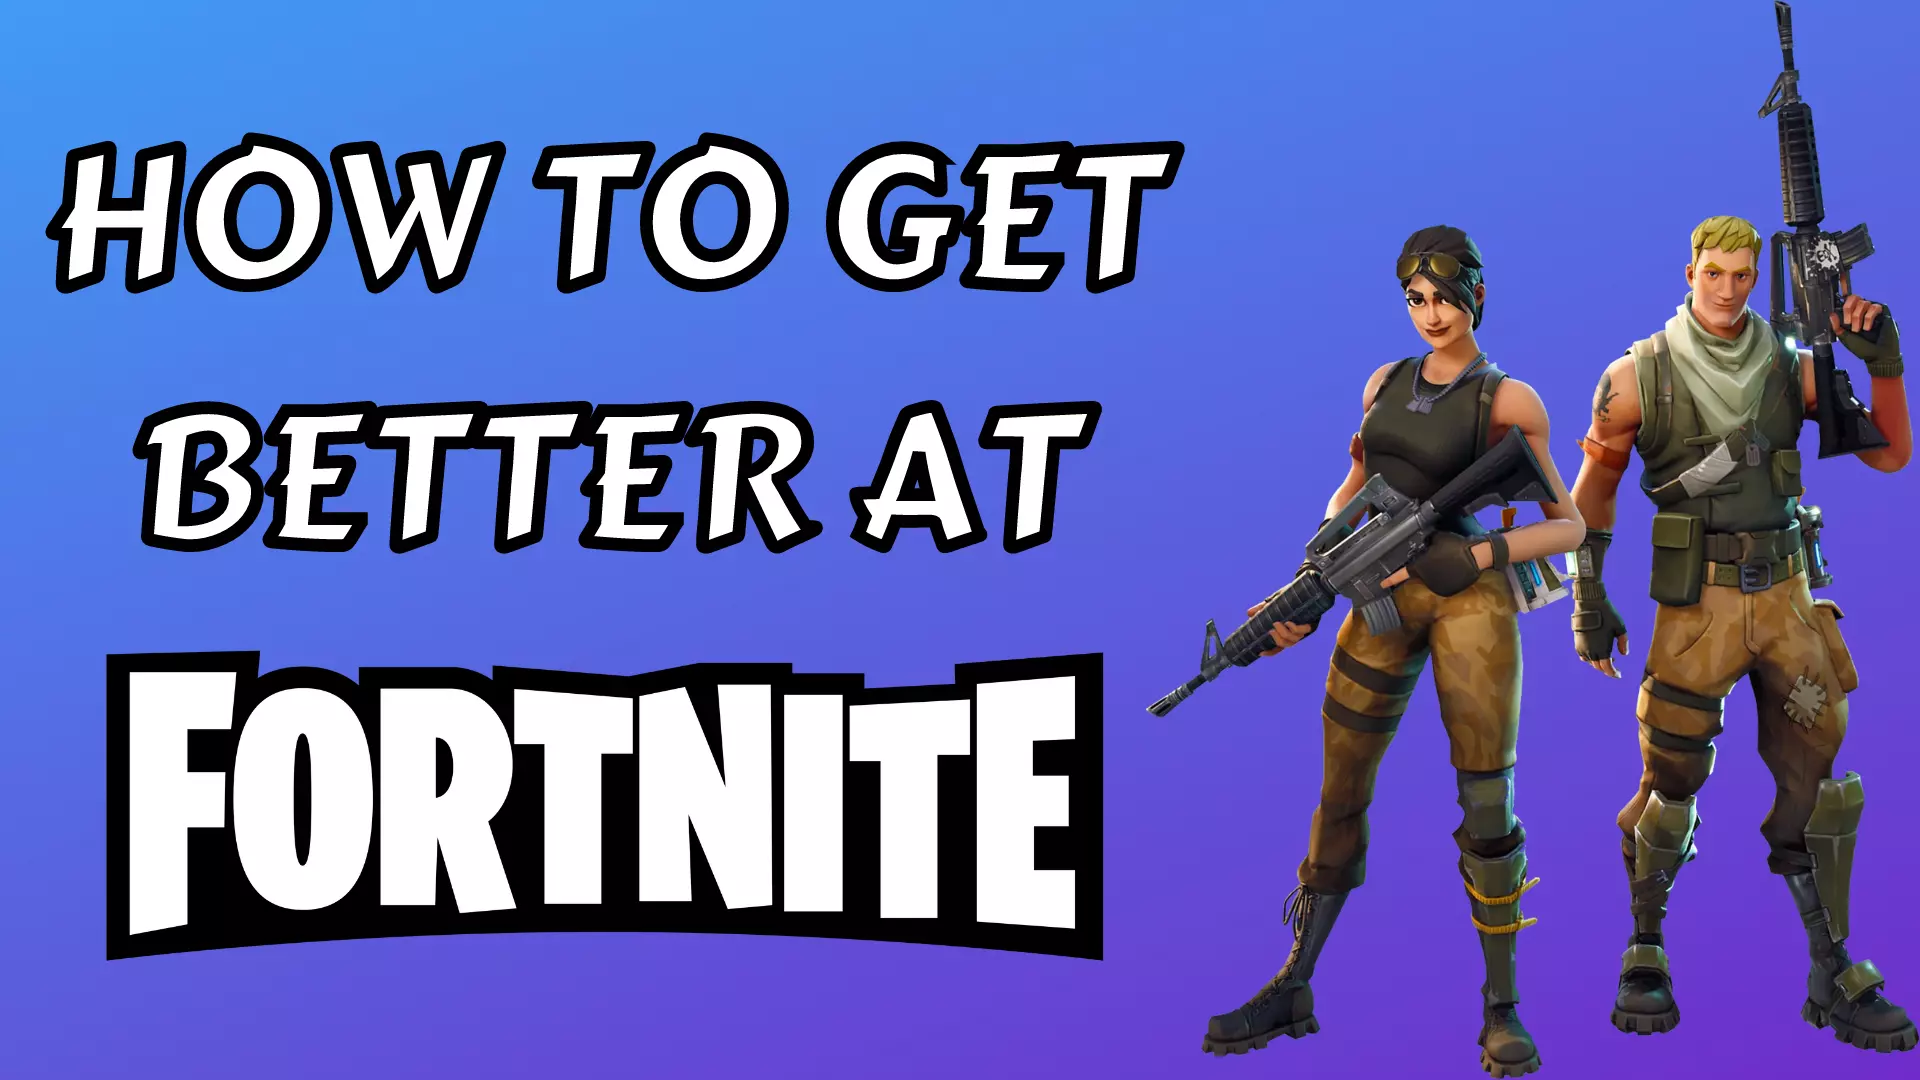 How to Get Better at Fortnite